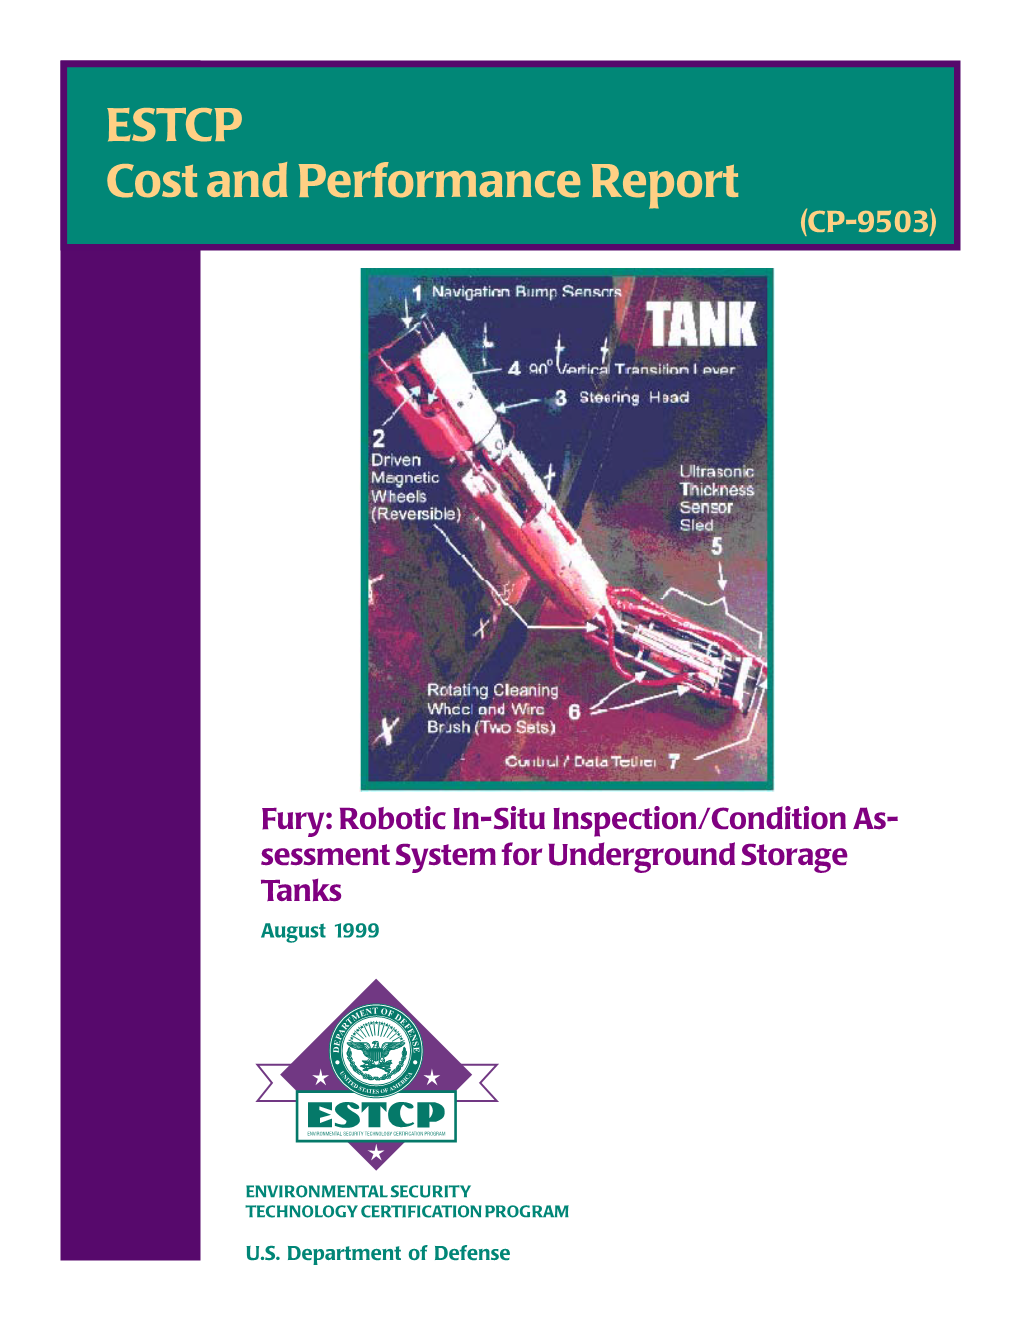 ESTCP Cost and Performance Report (CP-9503)